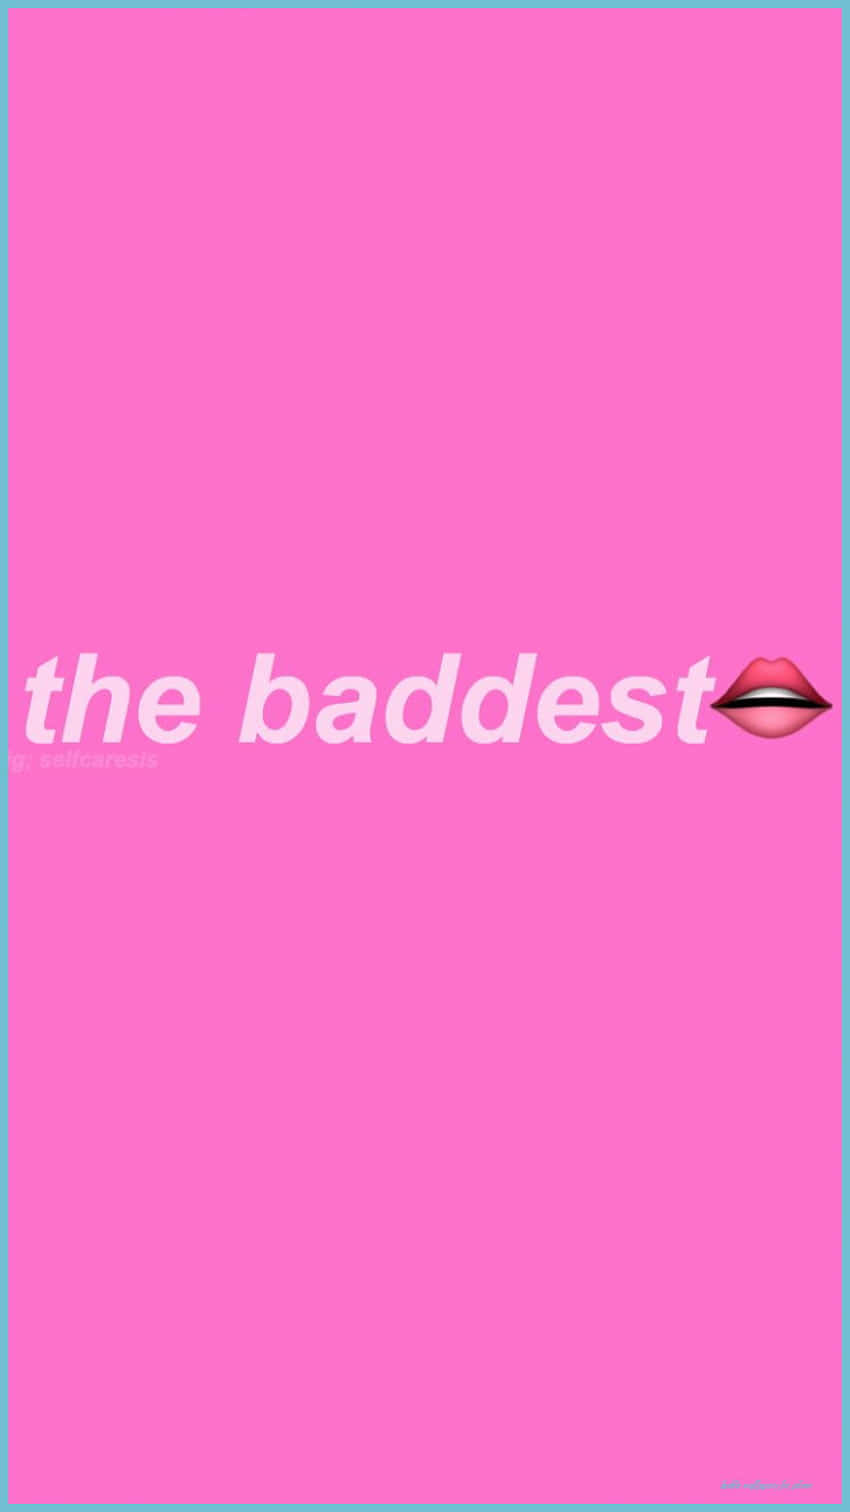 The Baddest - A Pink Background With The Words Wallpaper